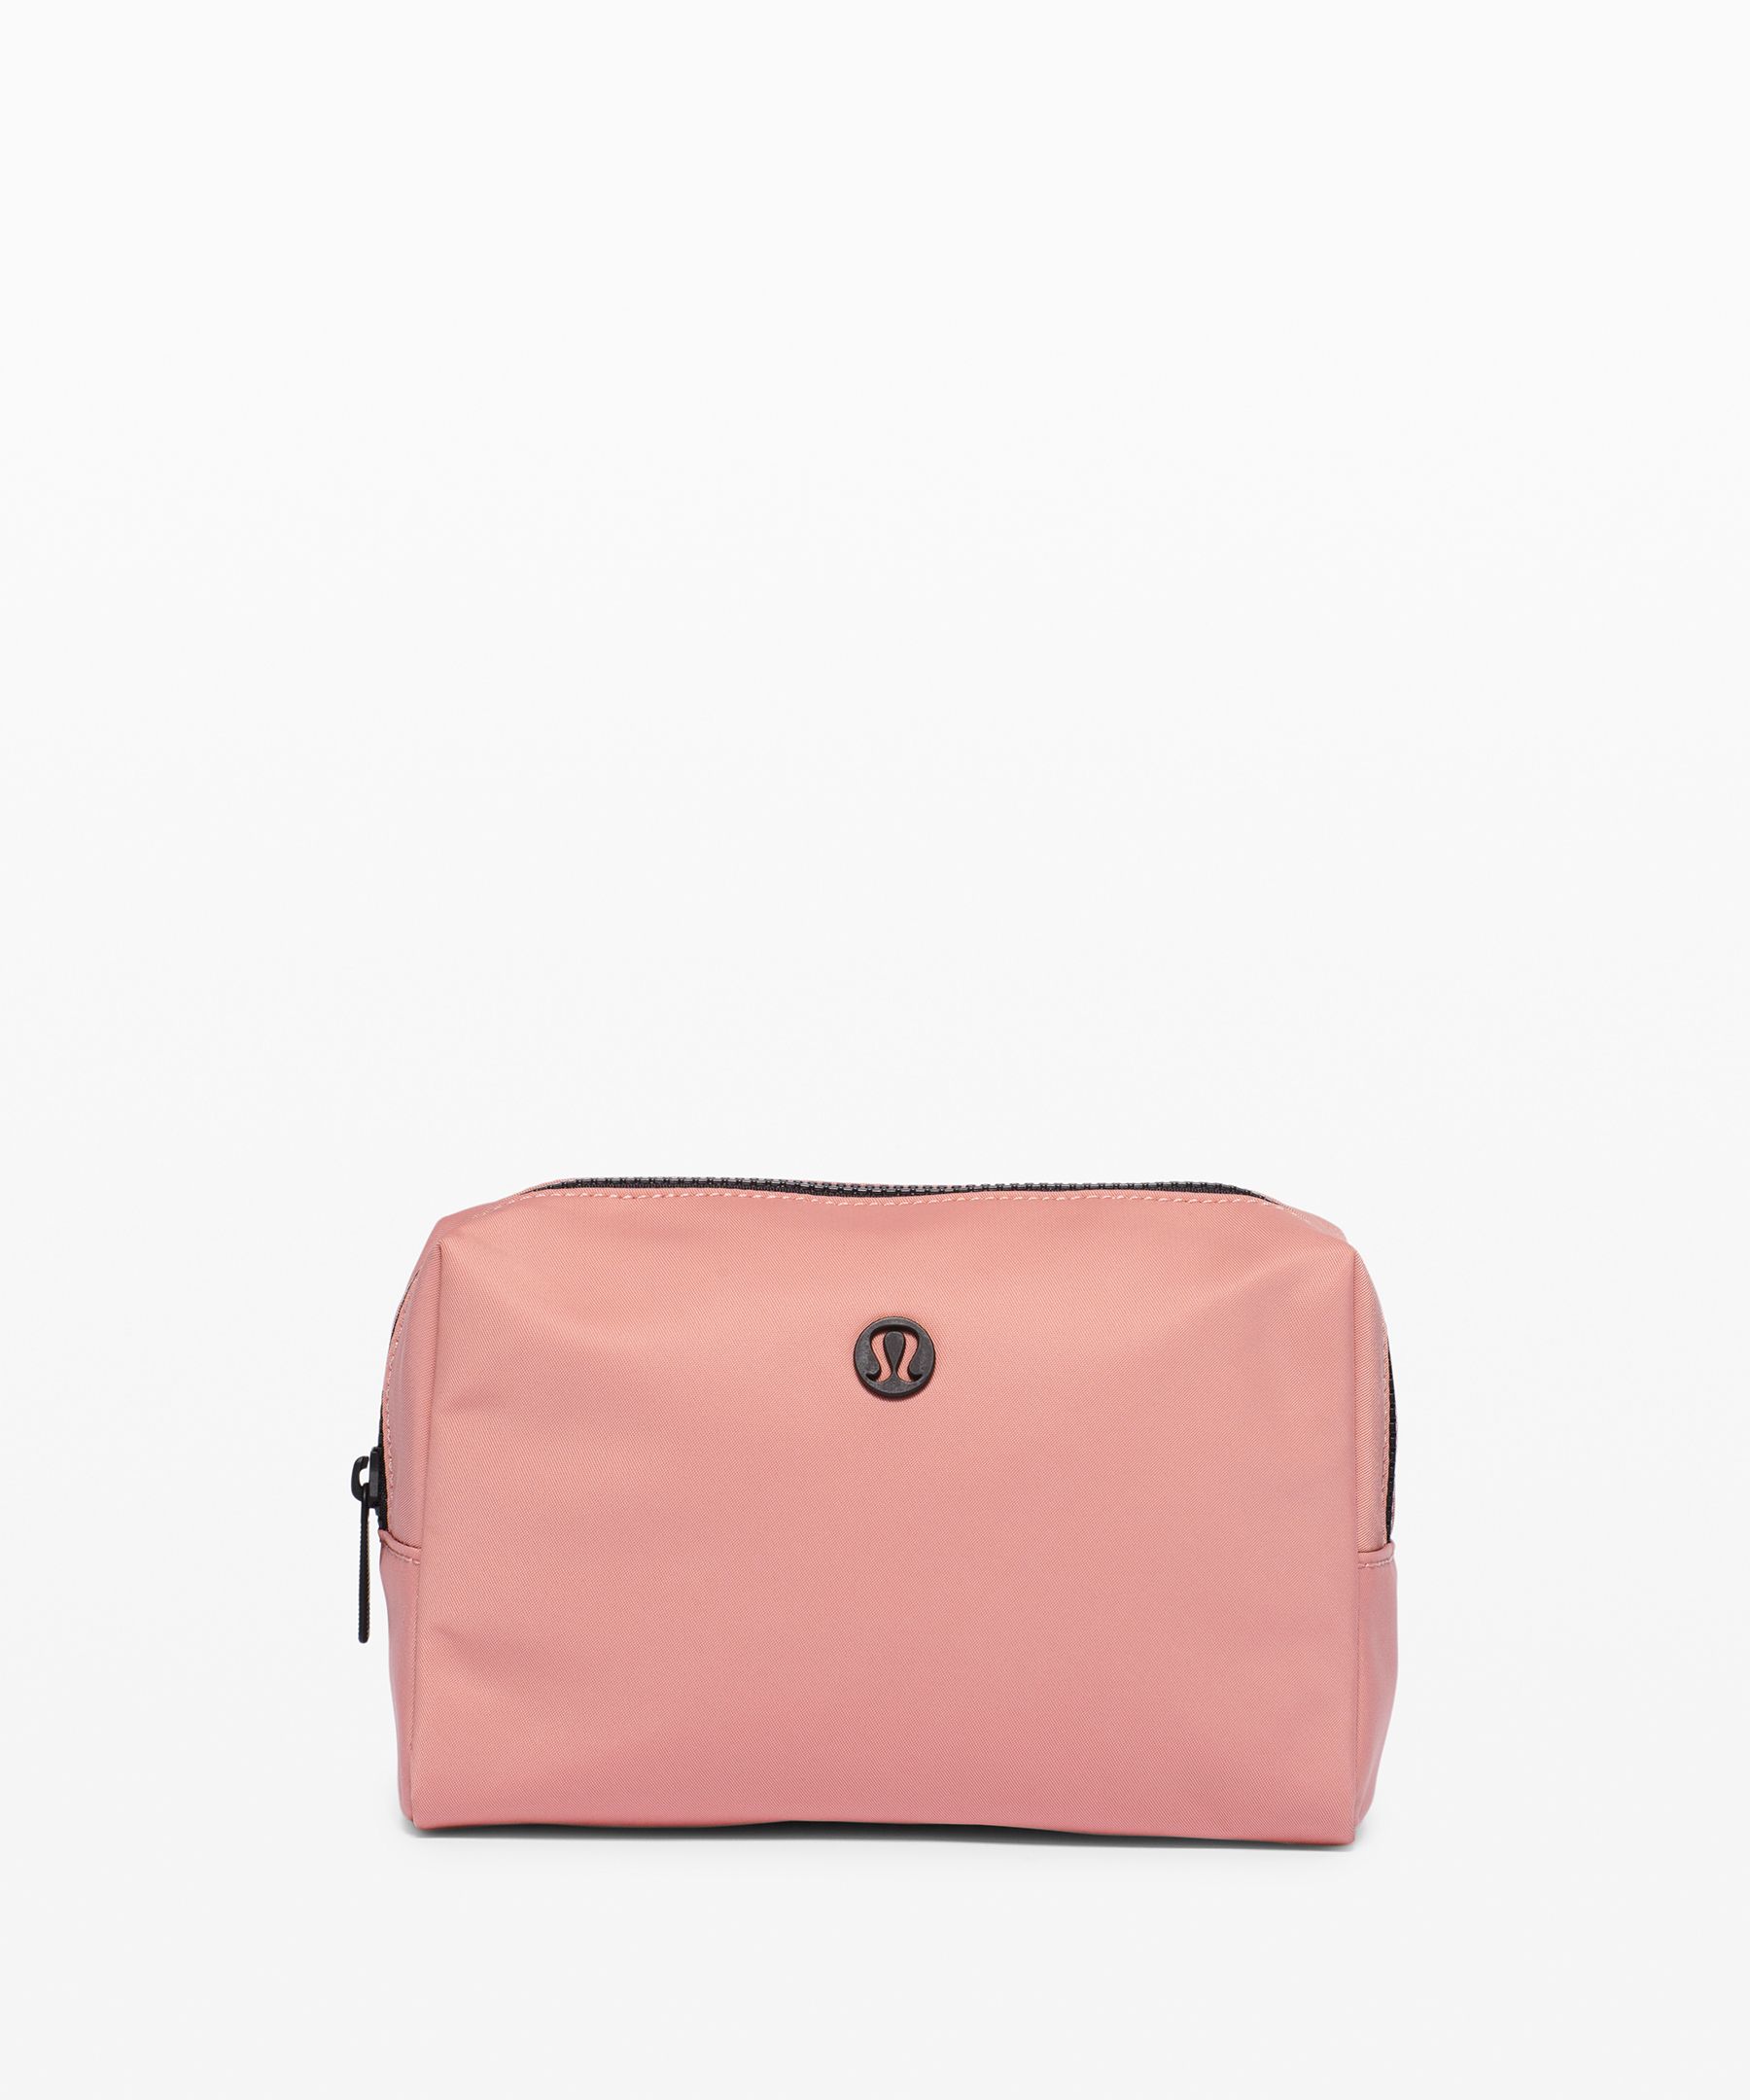 Lululemon All Your Small Things Pouch In Pink